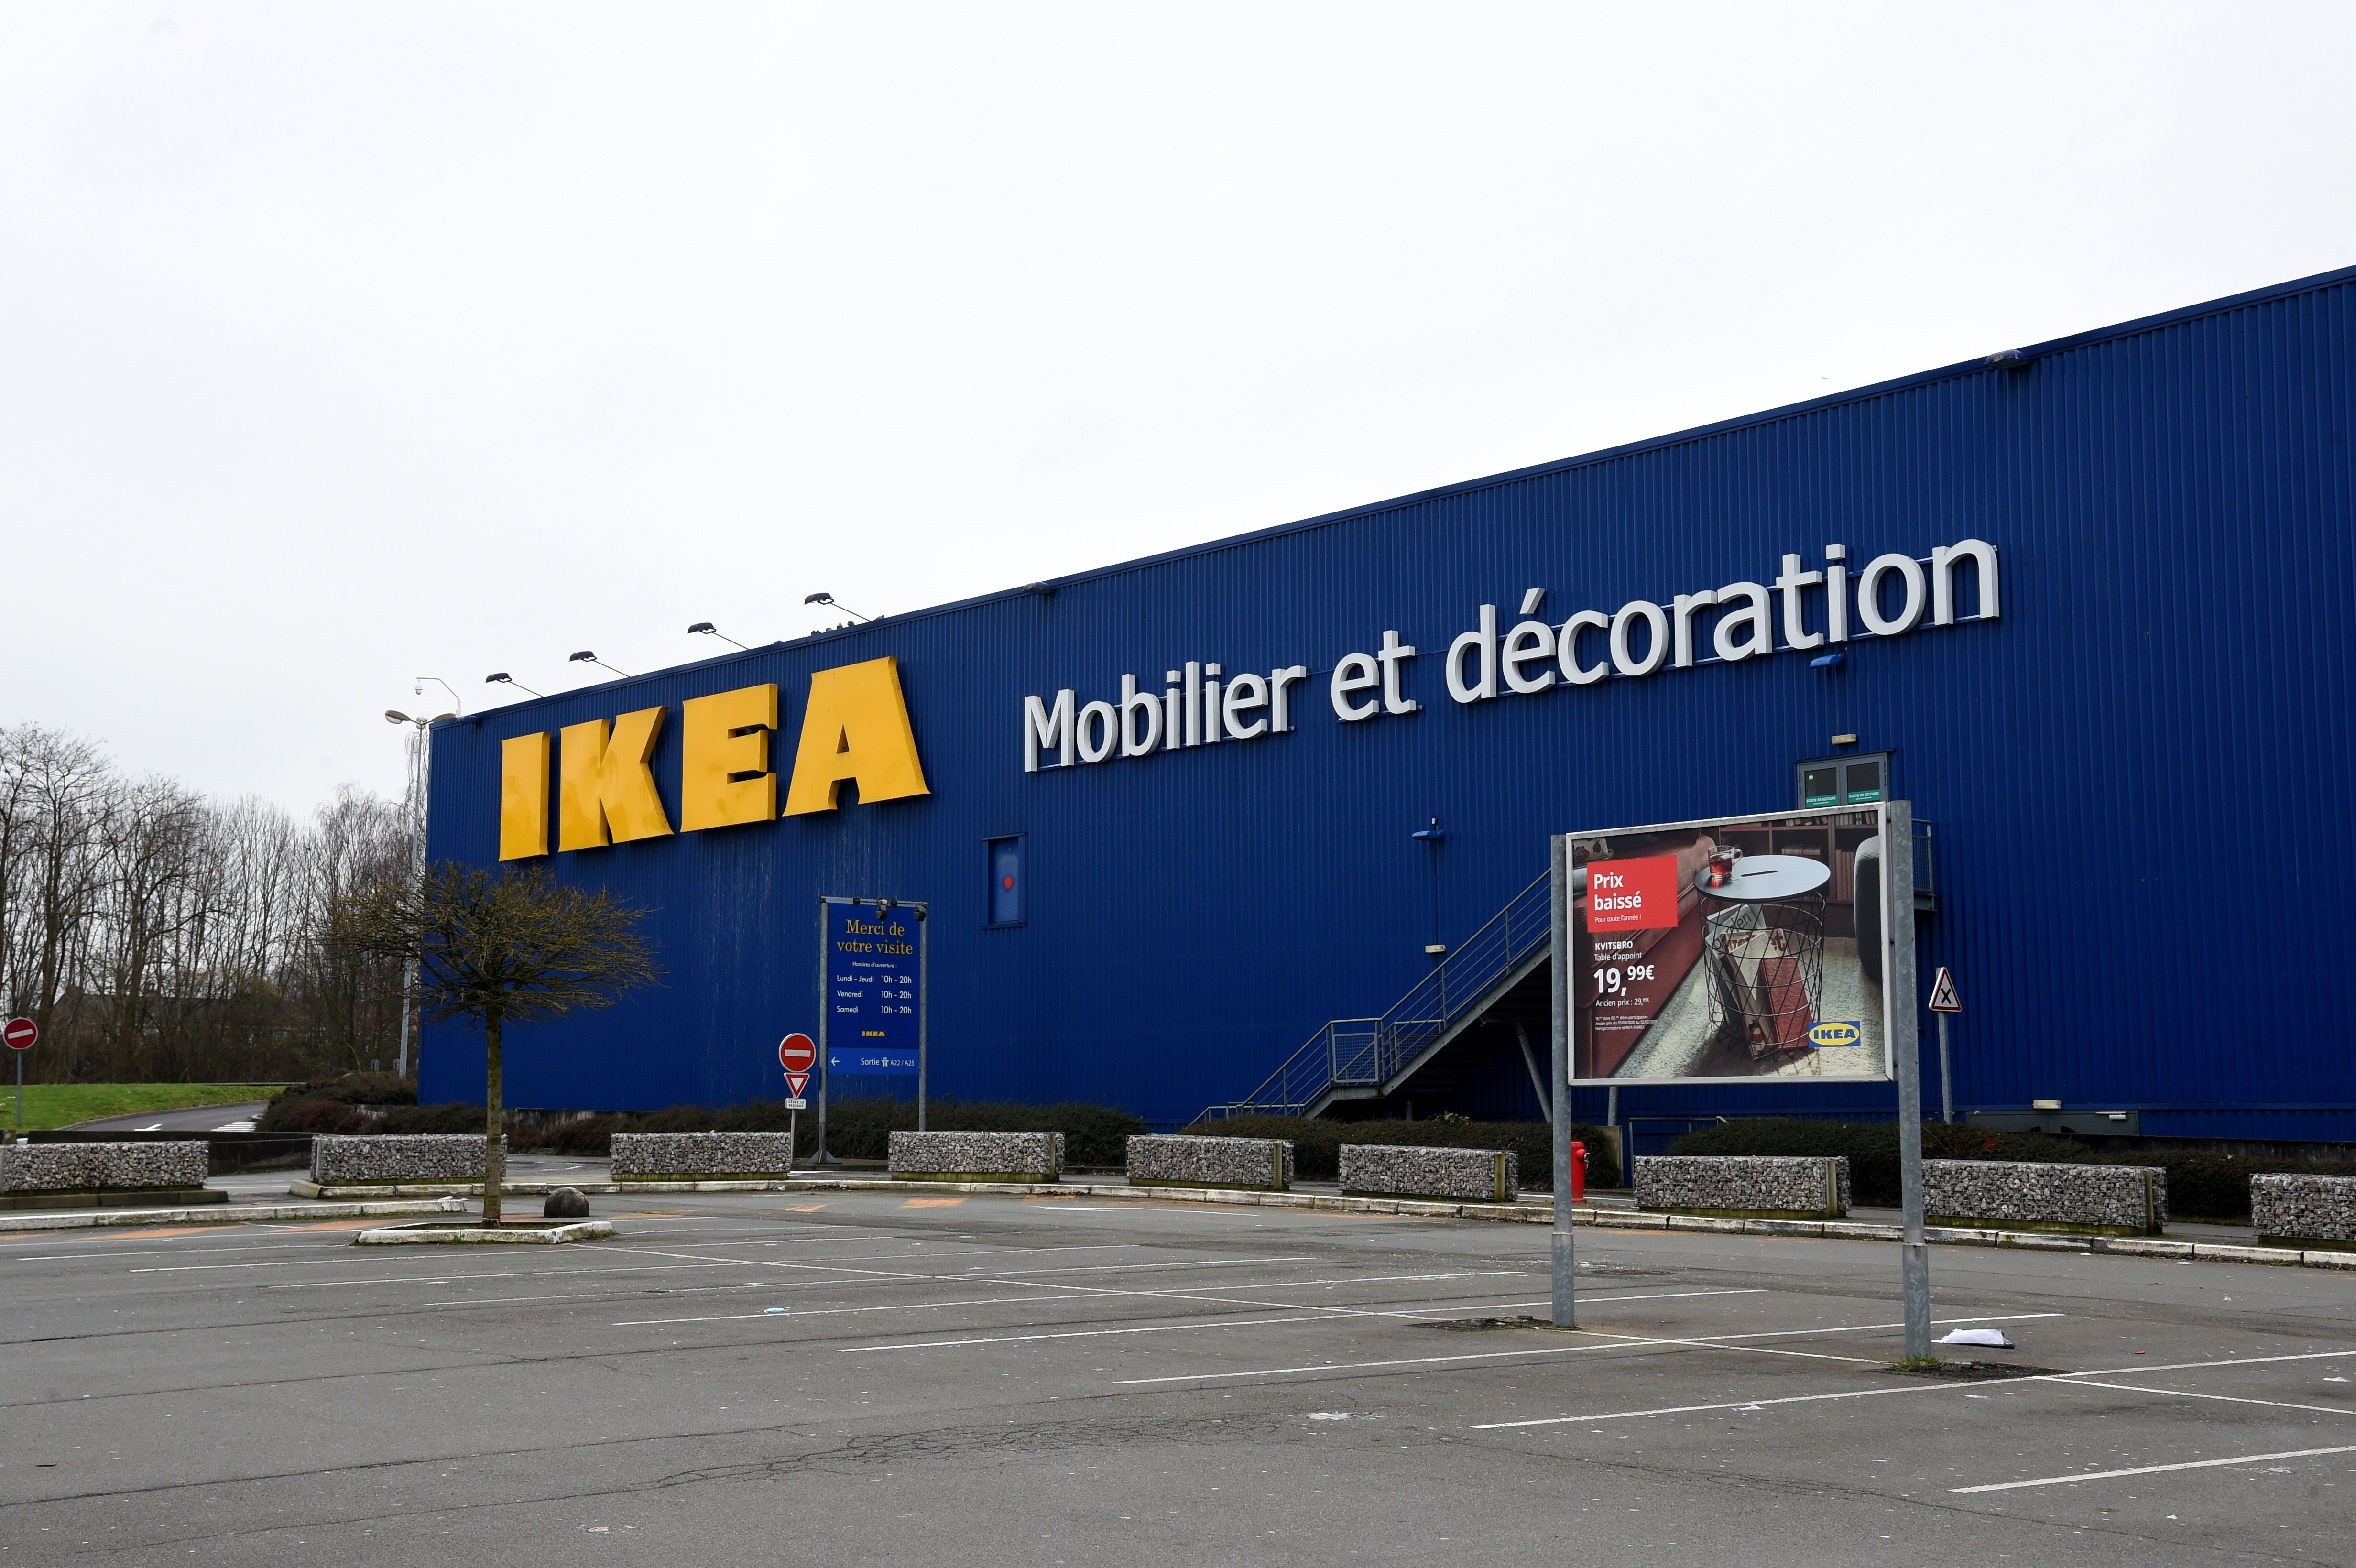 Ikea Retail France was ordered to pay a €1mn fine for spying on shop employees and applicants from 2009 to 2012